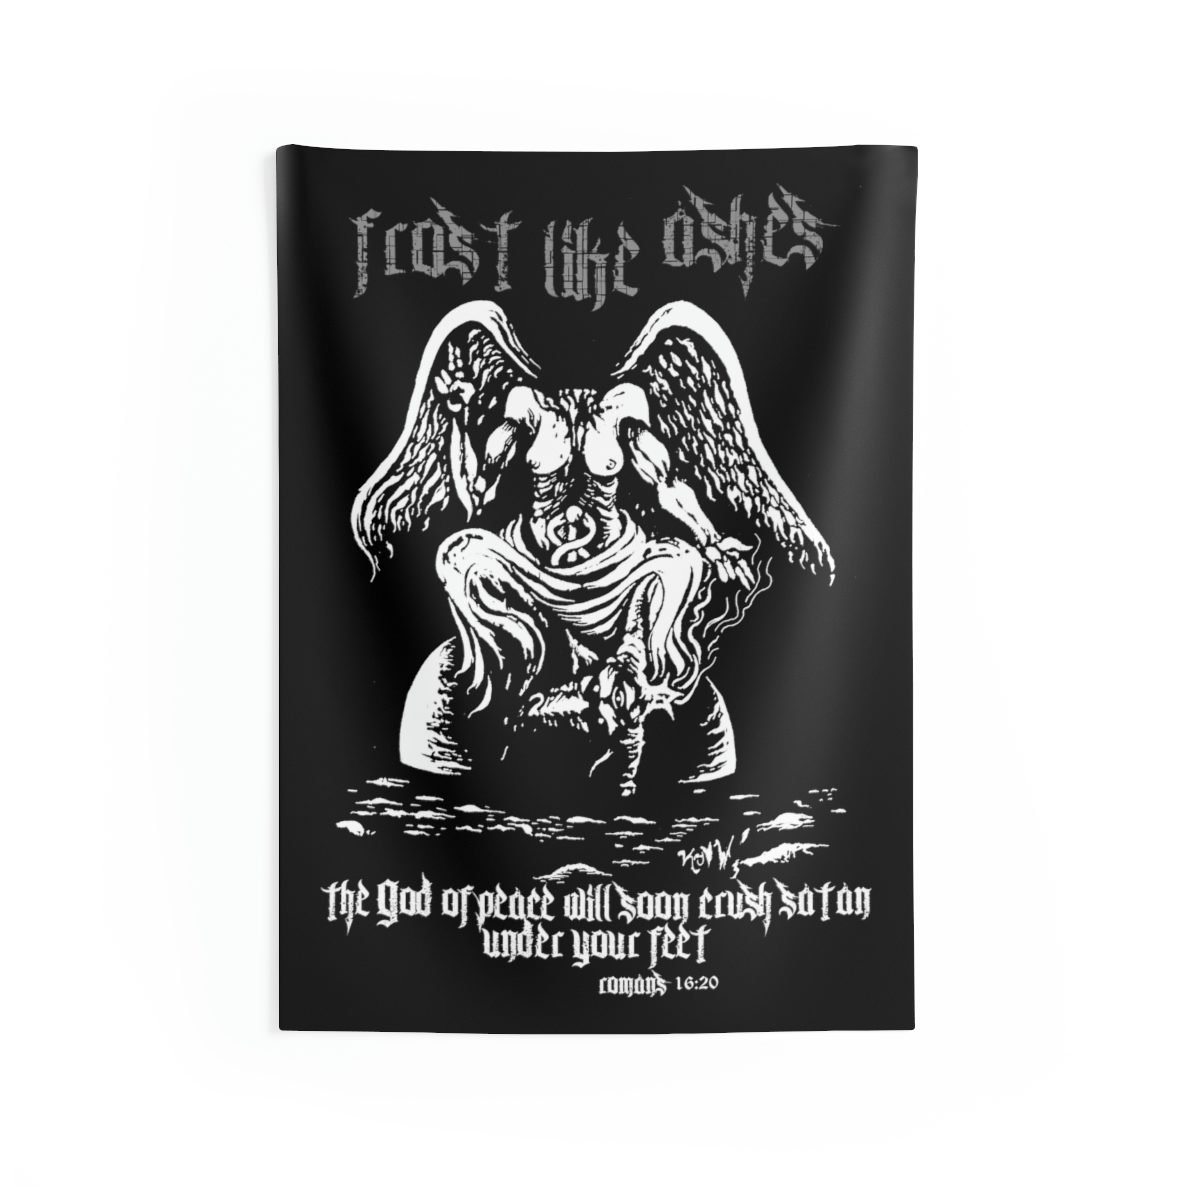 Frost Like Ashes Desecrated Baphomet Indoor Wall Tapestries